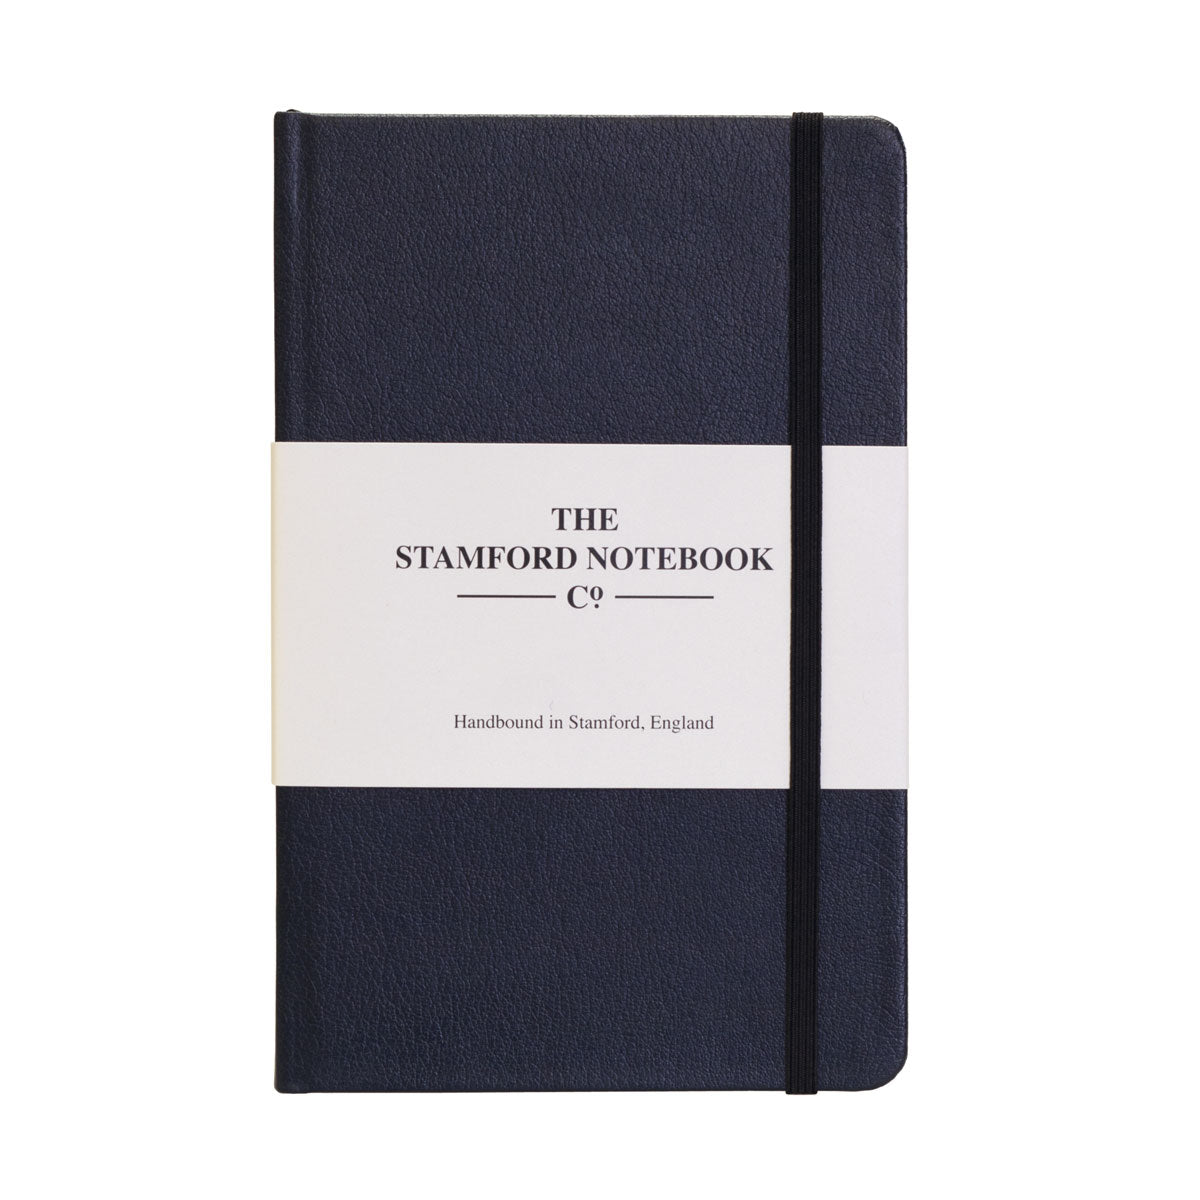 Navy blue recycled leather handbound notebook